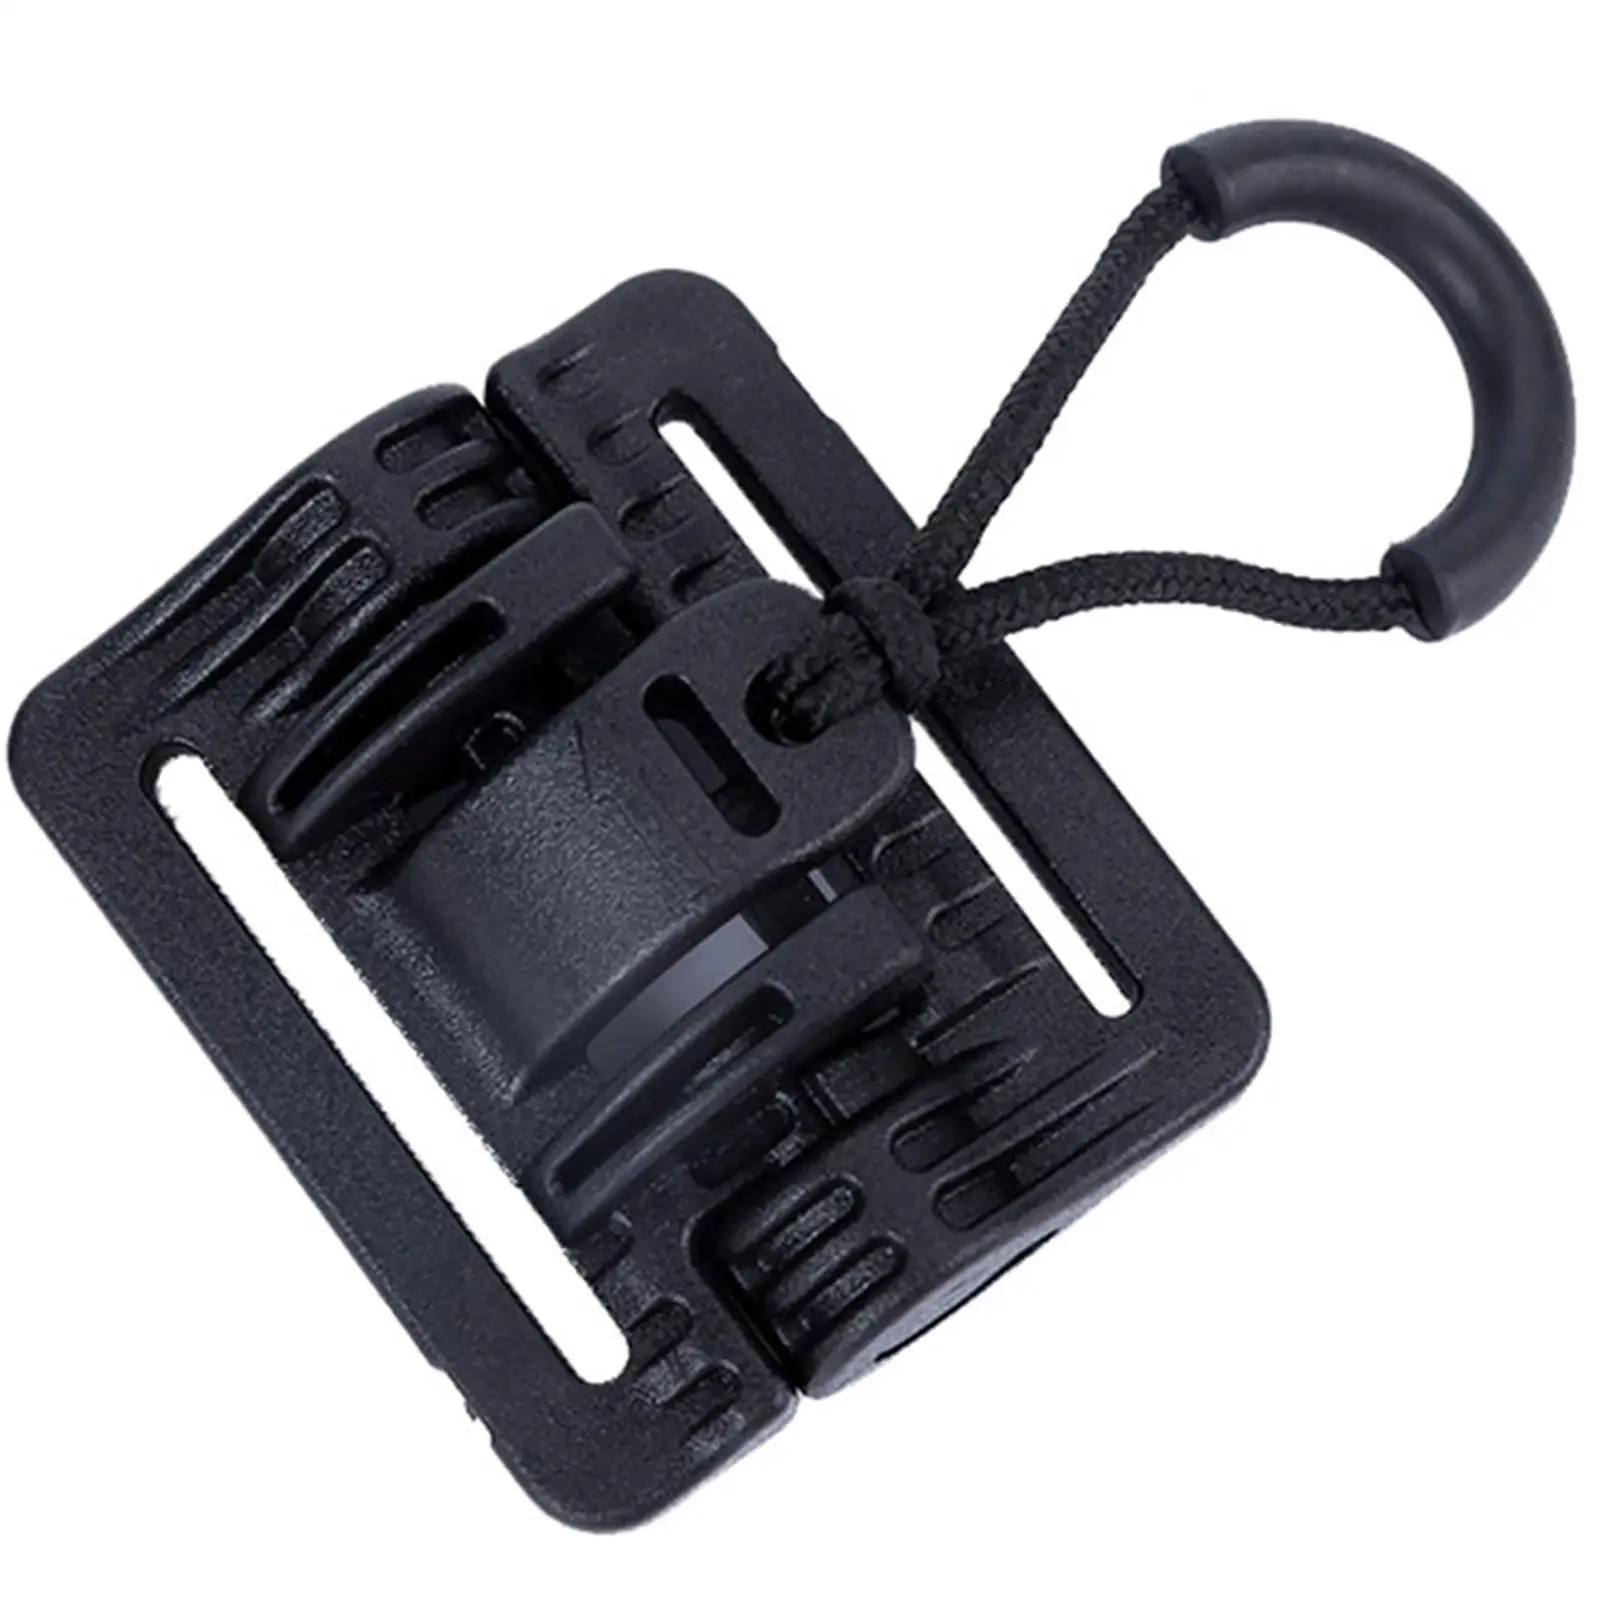 Vest Quick Release Buckle Quick Release Assembly Kit for Hunting